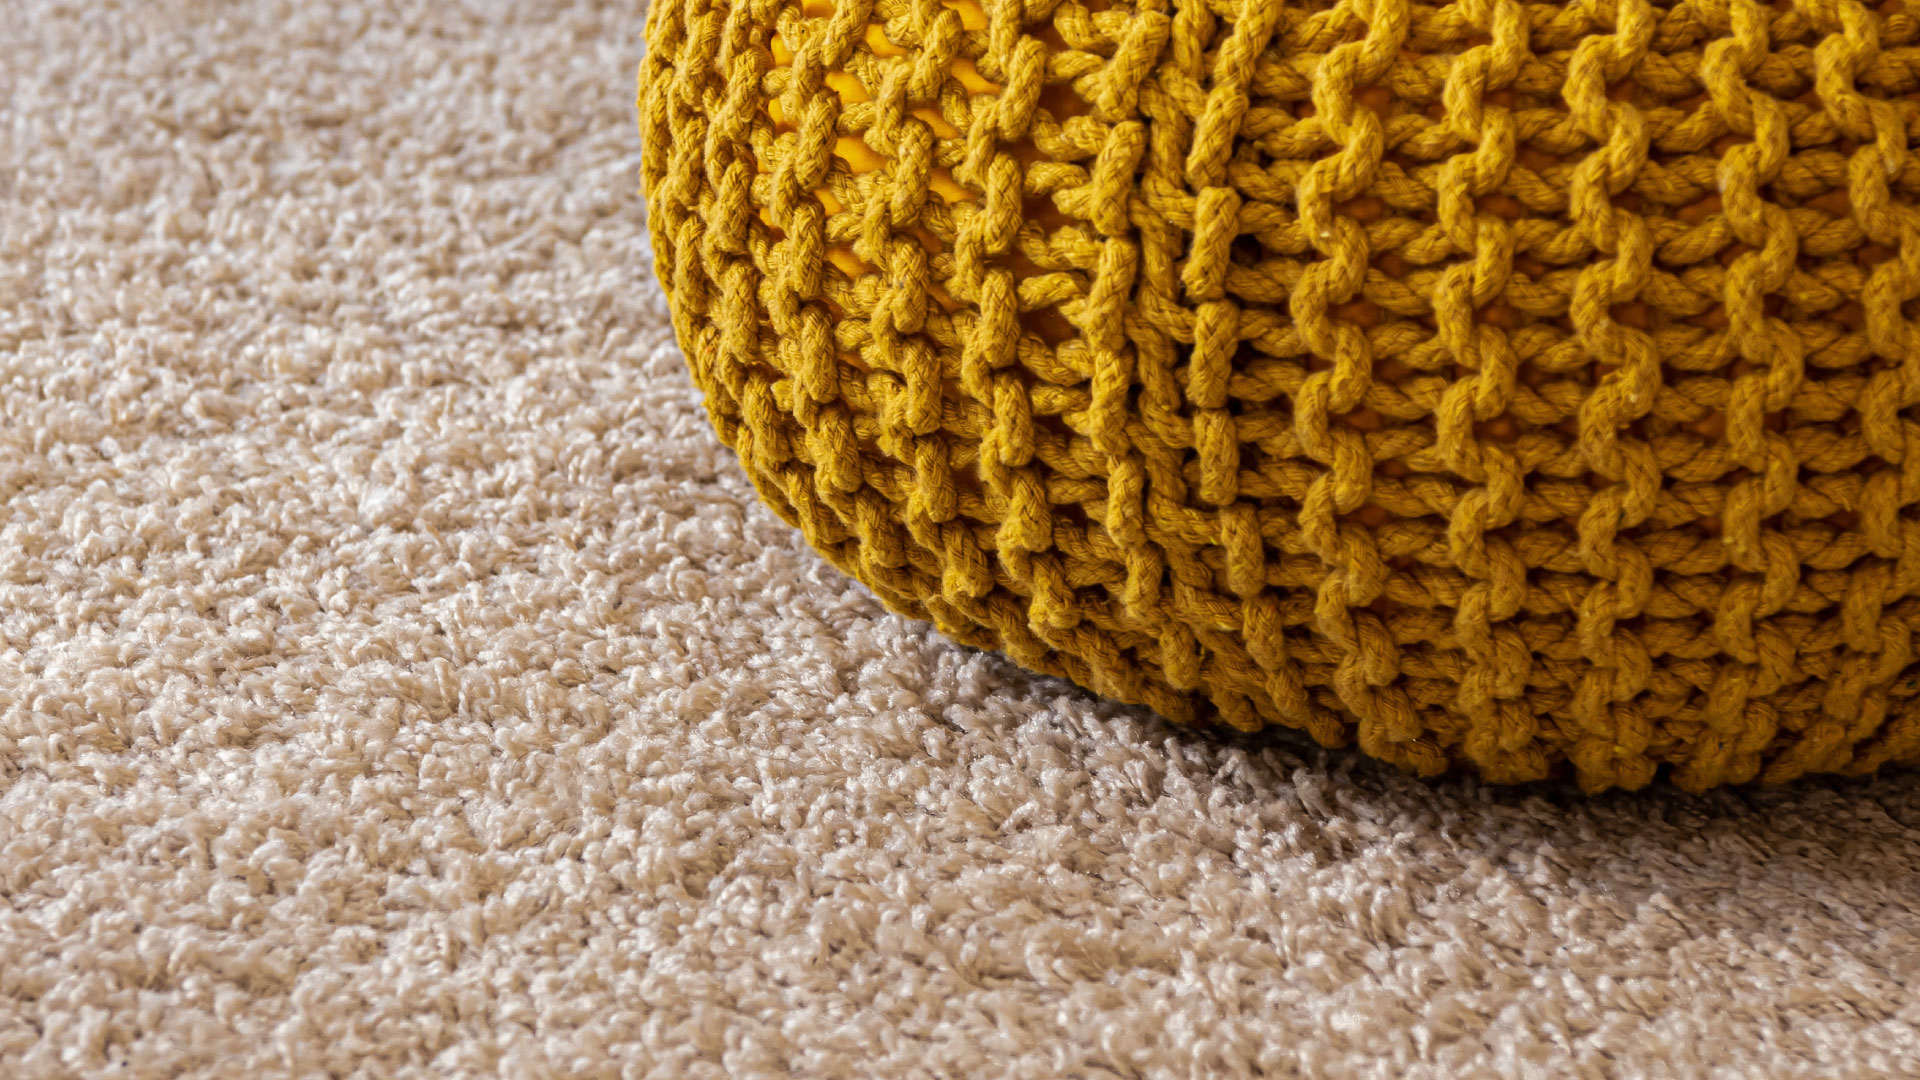 carpet cleaners in Nassau, carpet cleaning in Nassau, carpet cleaning bkln, carpet cleaners in Nassau,  commercial carpet cleaning, commercial carpet cleaning in Nassau,carpet cleaning in Nassau,  Nassau rug cleaners, rug cleaning services in Nassau, same day carpet cleaning, same day rug cleaning